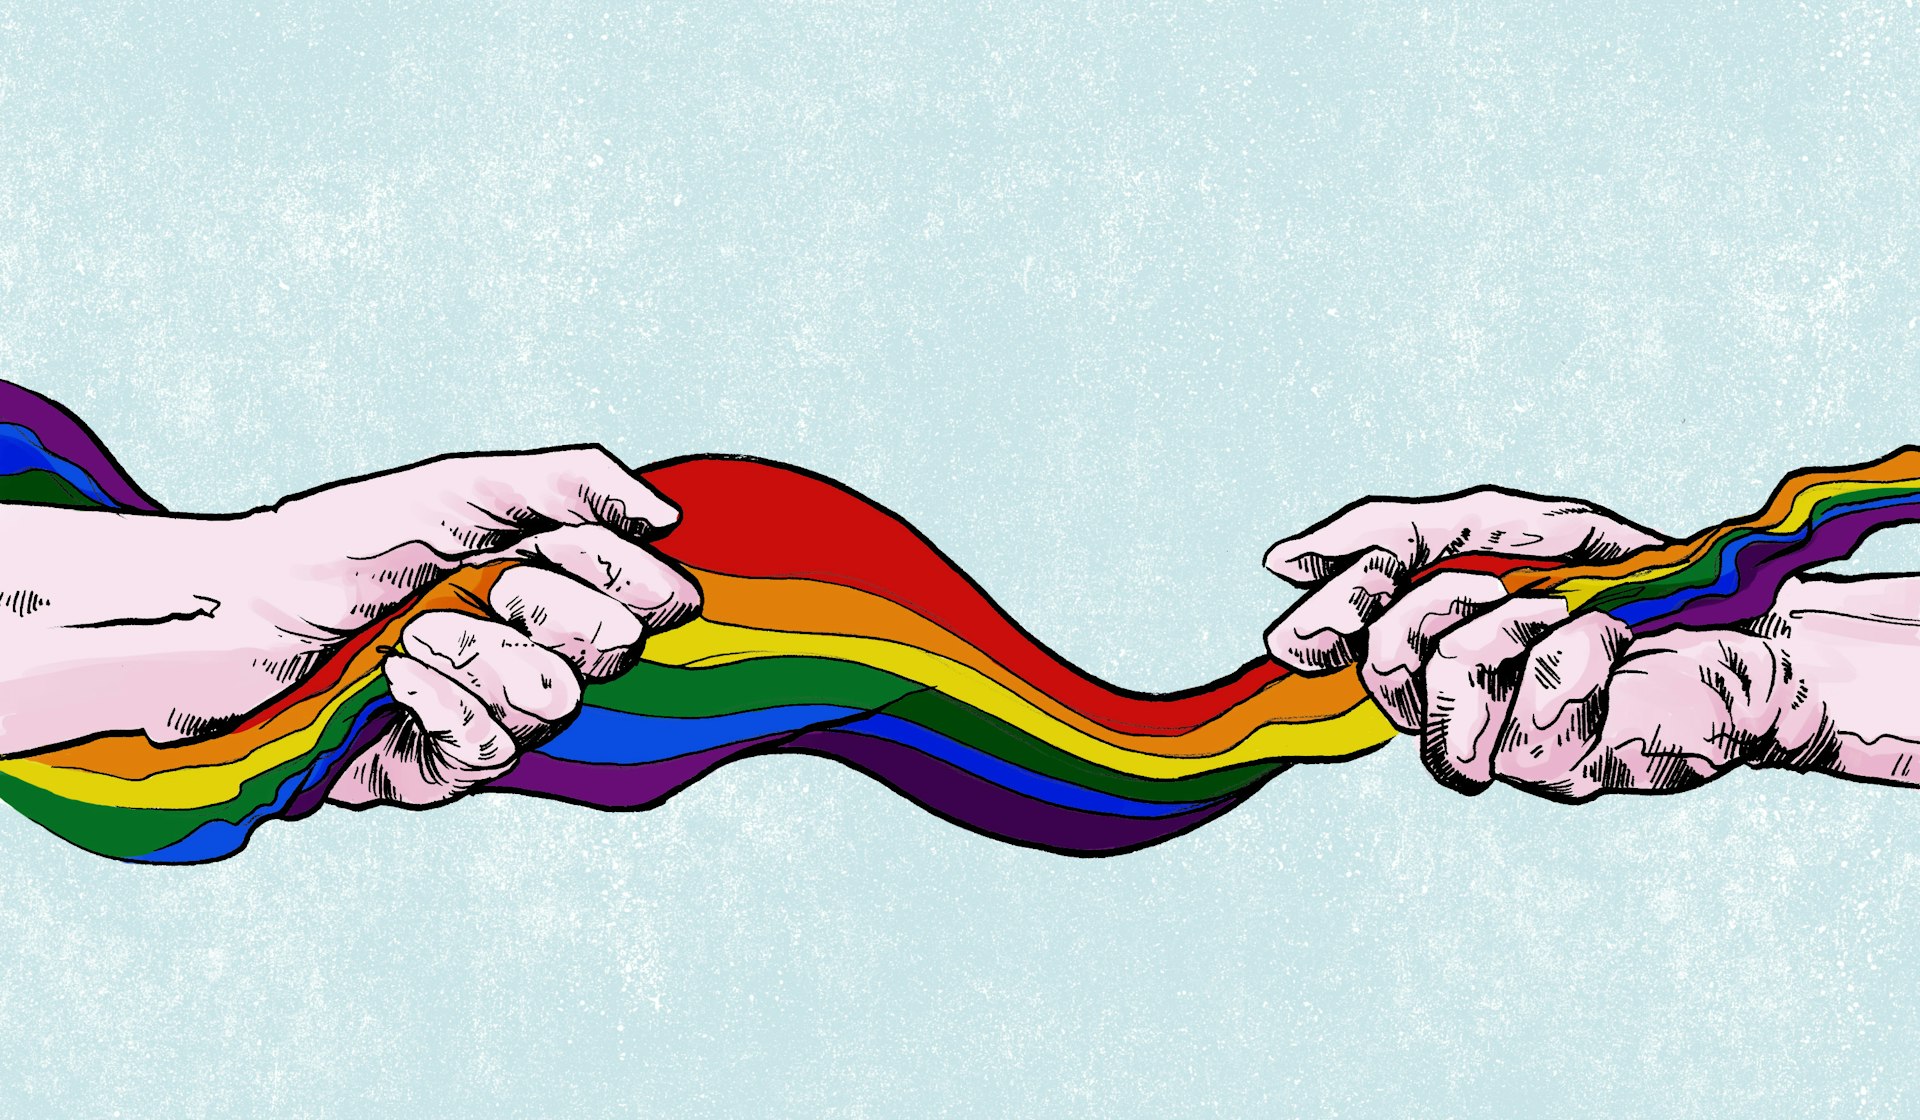 To be truly inclusive, Pride must solve its identity crisis